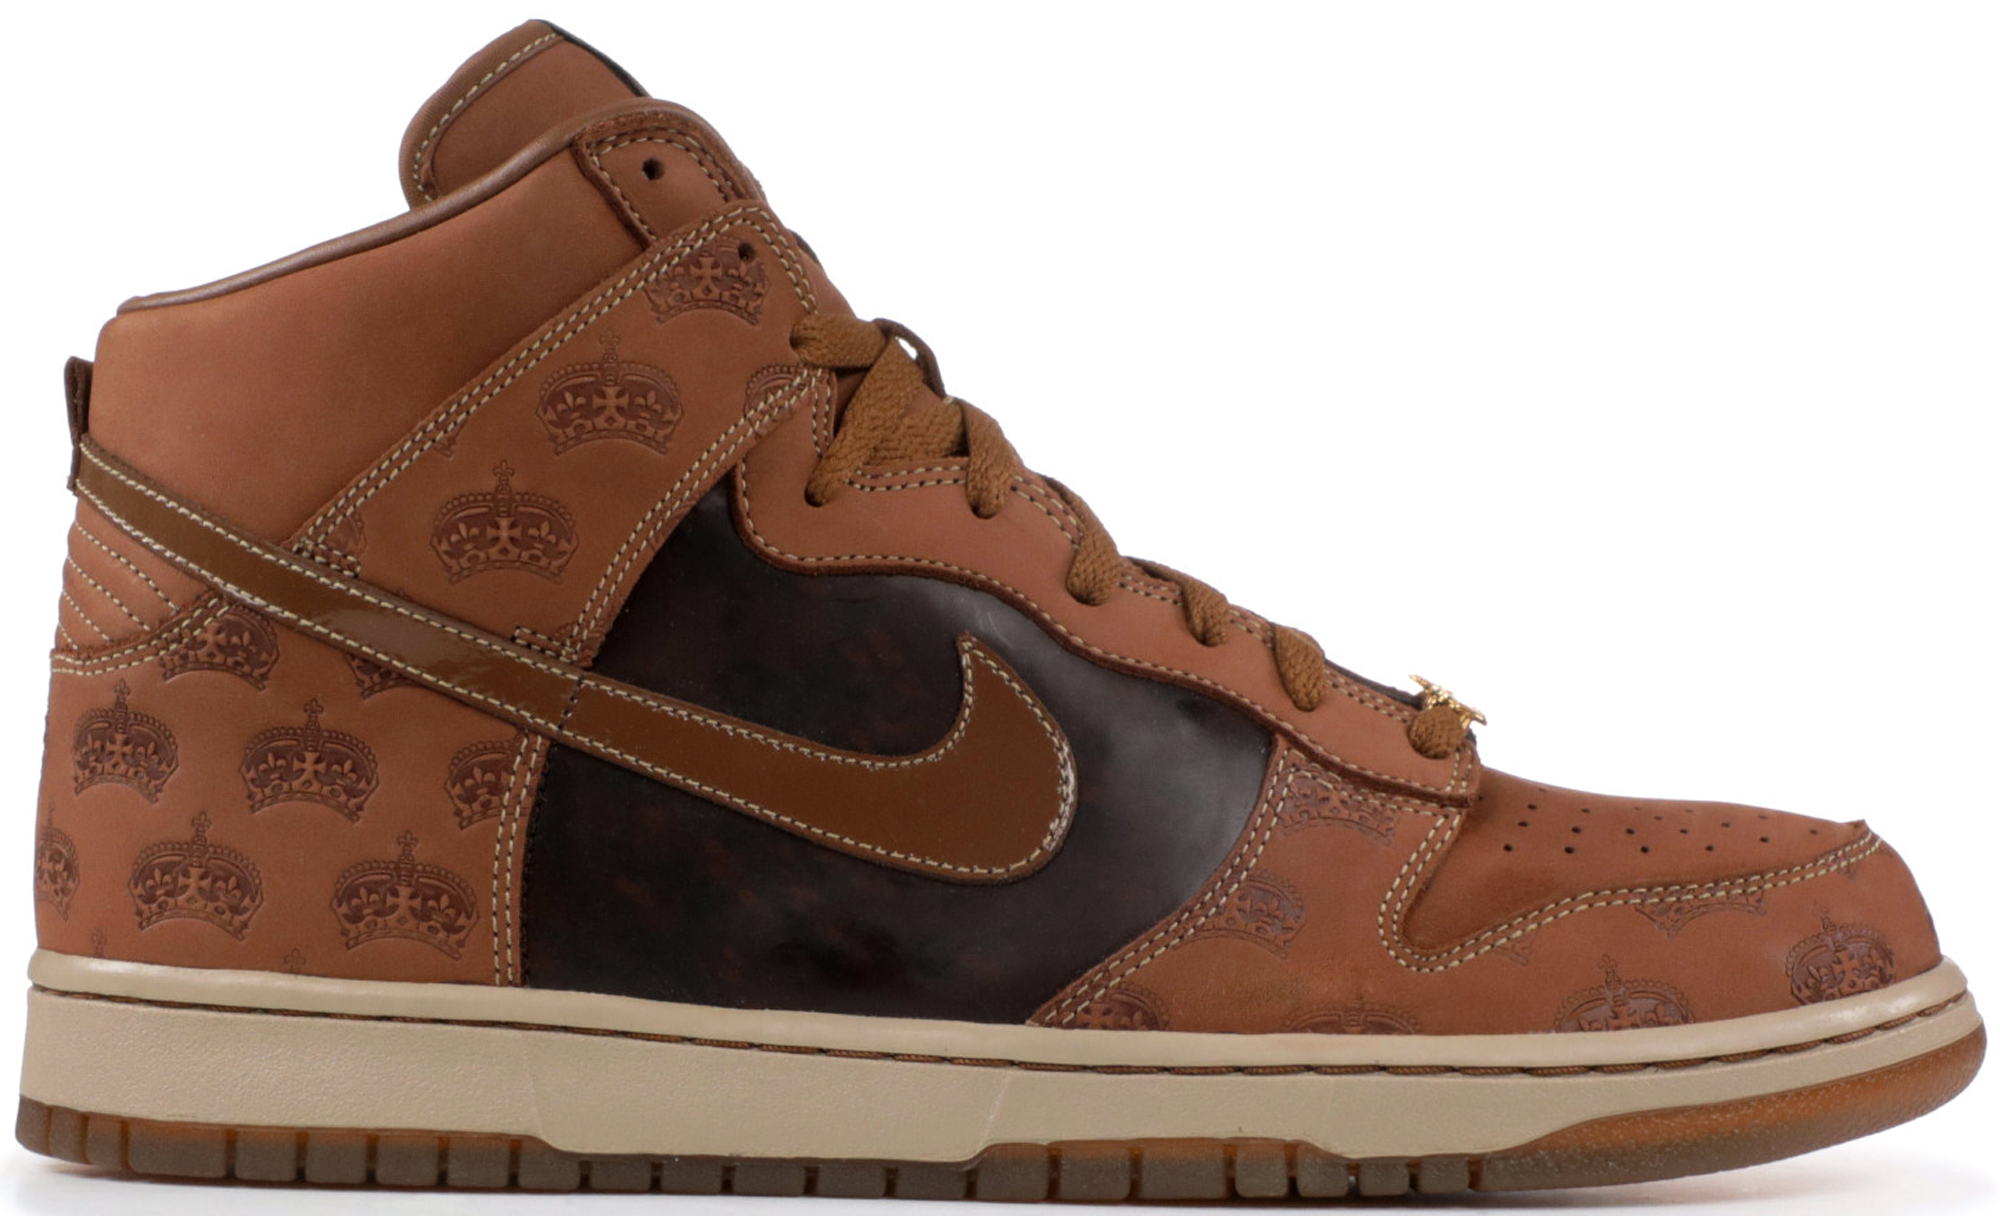 Nike Dunk High Mighty Crown Bison 